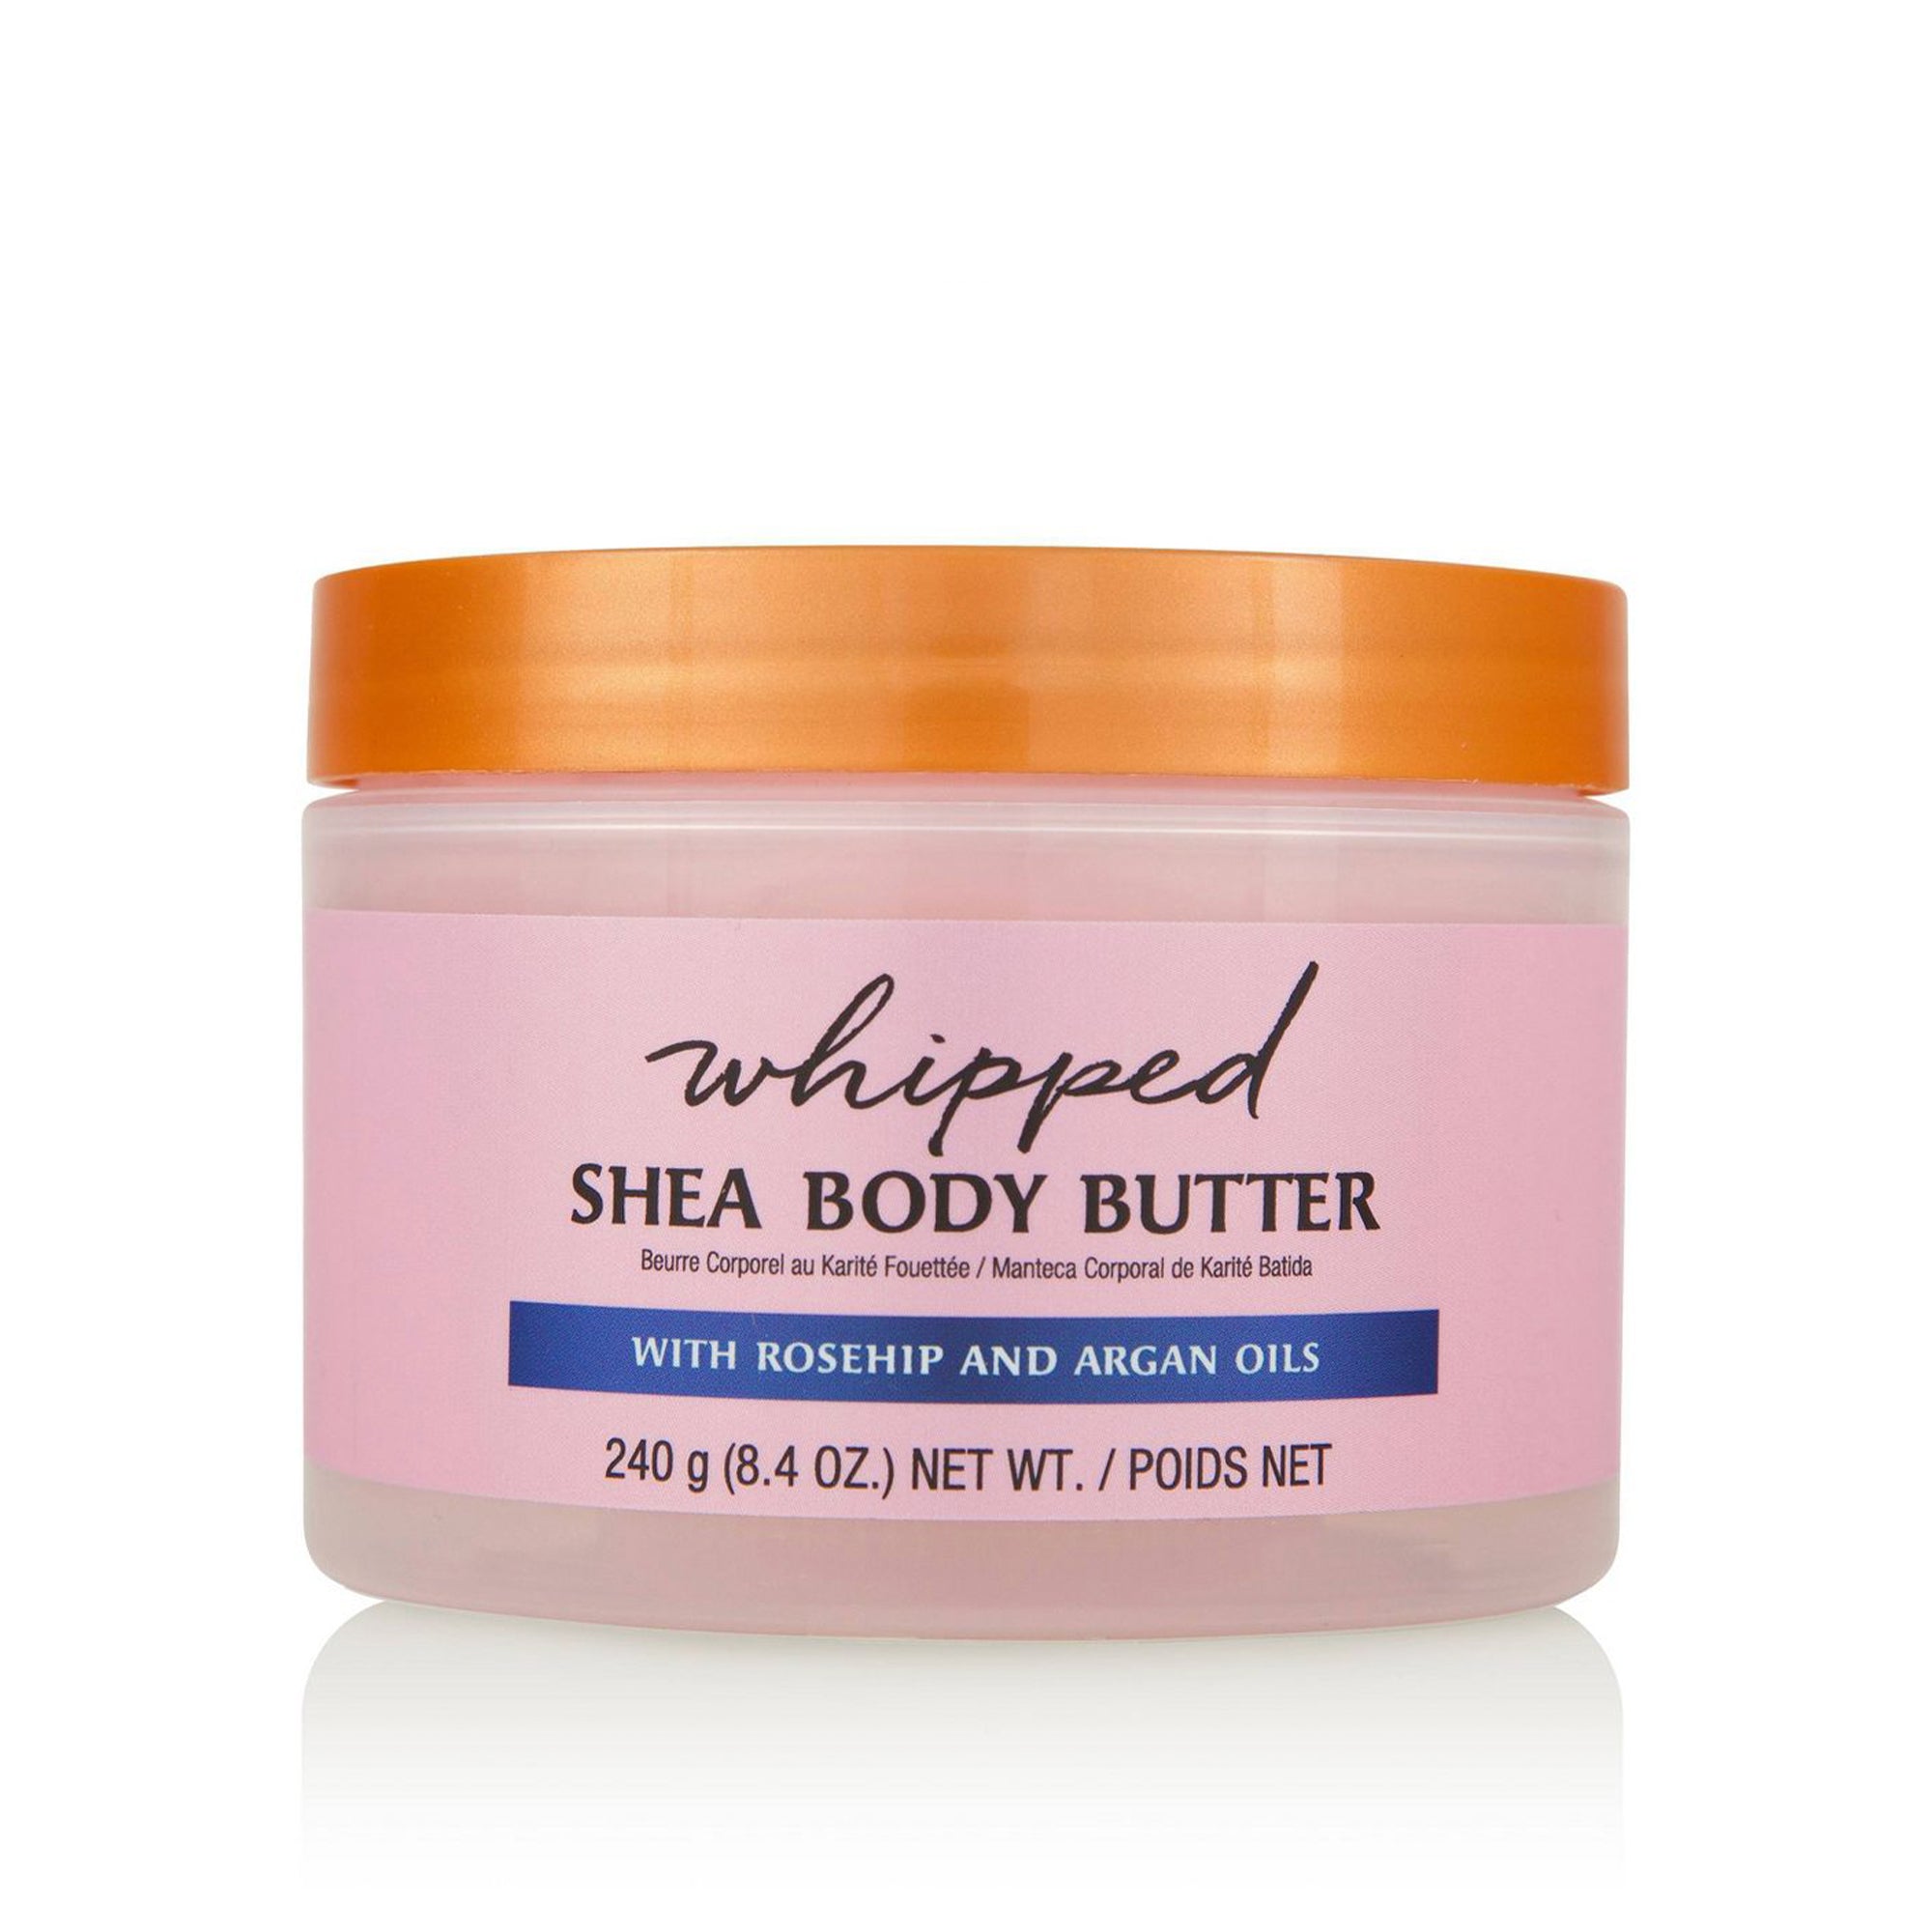 Tree Hut Moroccan Rose Whipped Body Butter 8.4 oz